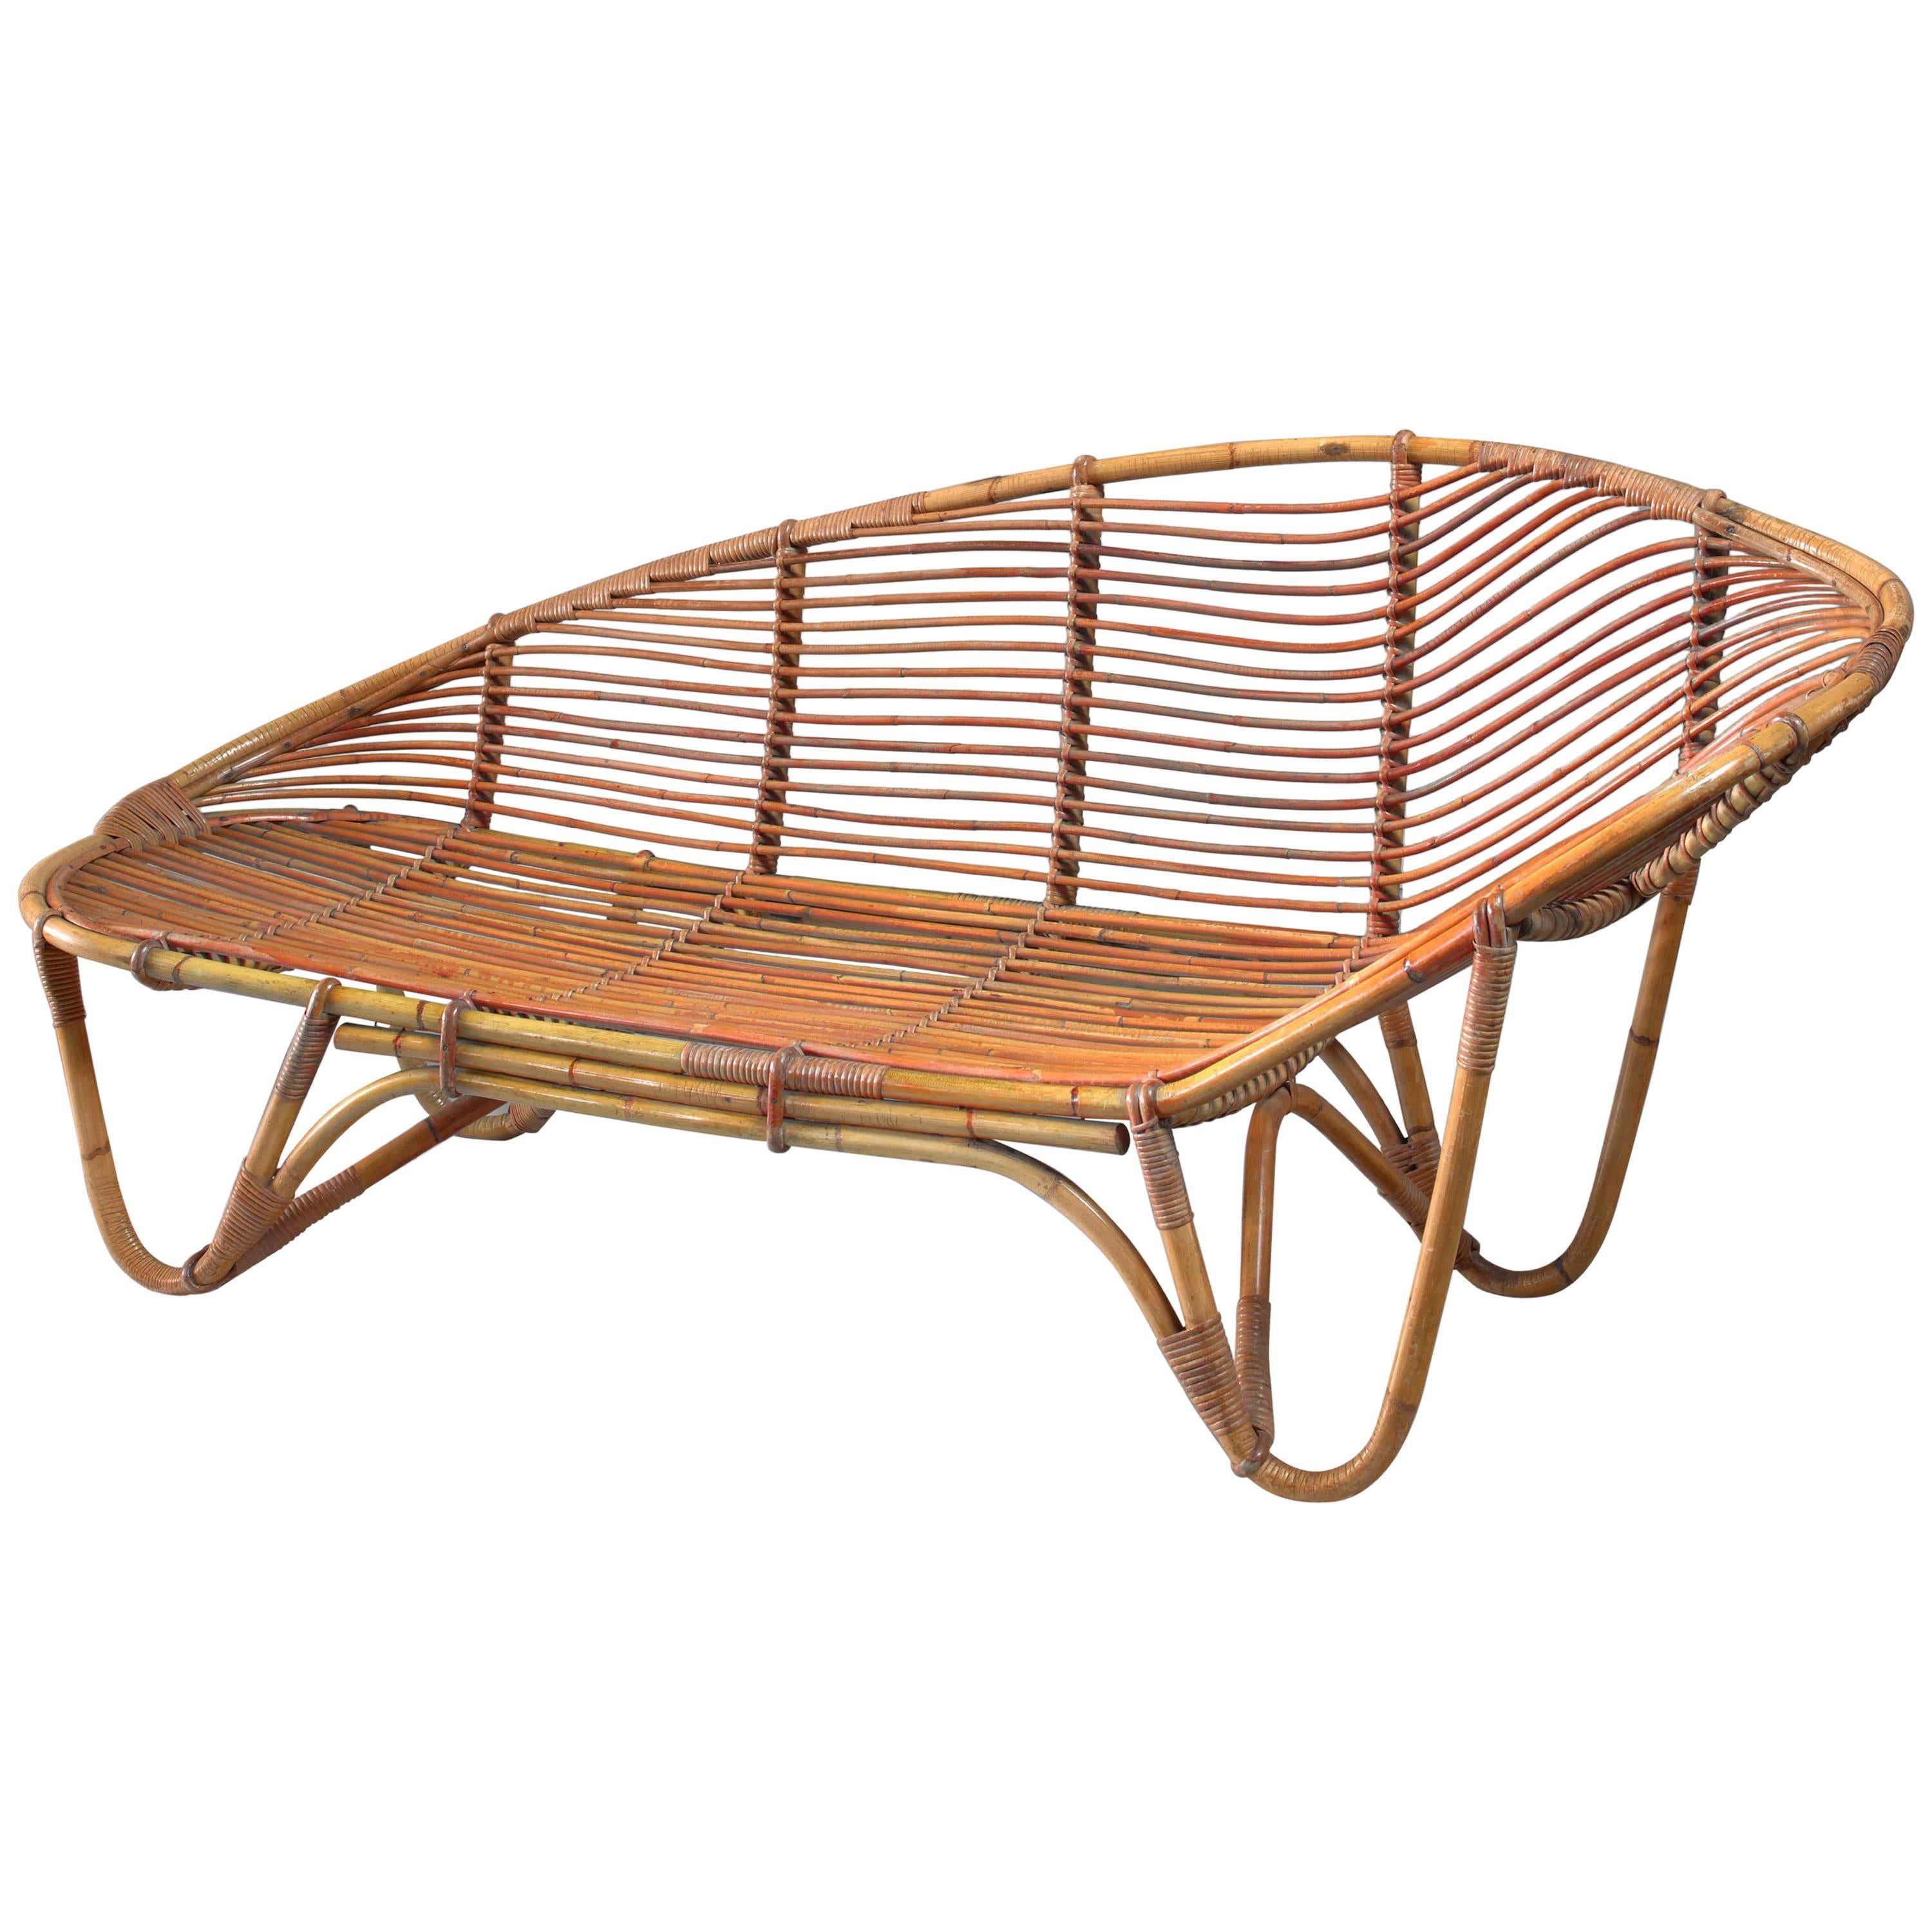 Swedish Bamboo and Rattan Chaise Longue, 1940s For Sale